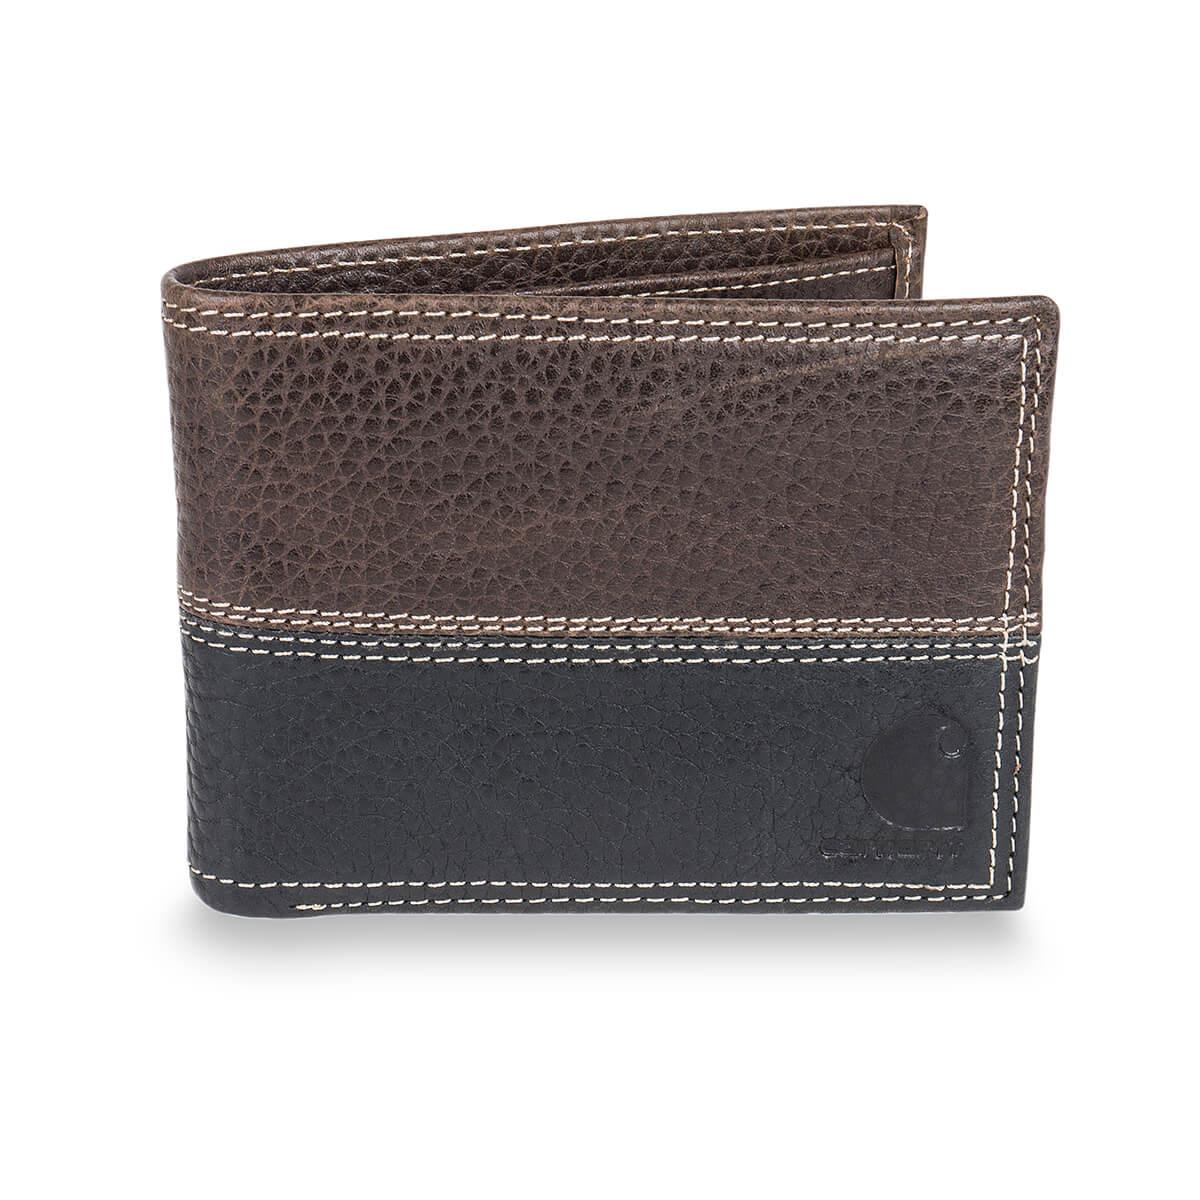  Men's Rugged Passcase Two Tone Wallet